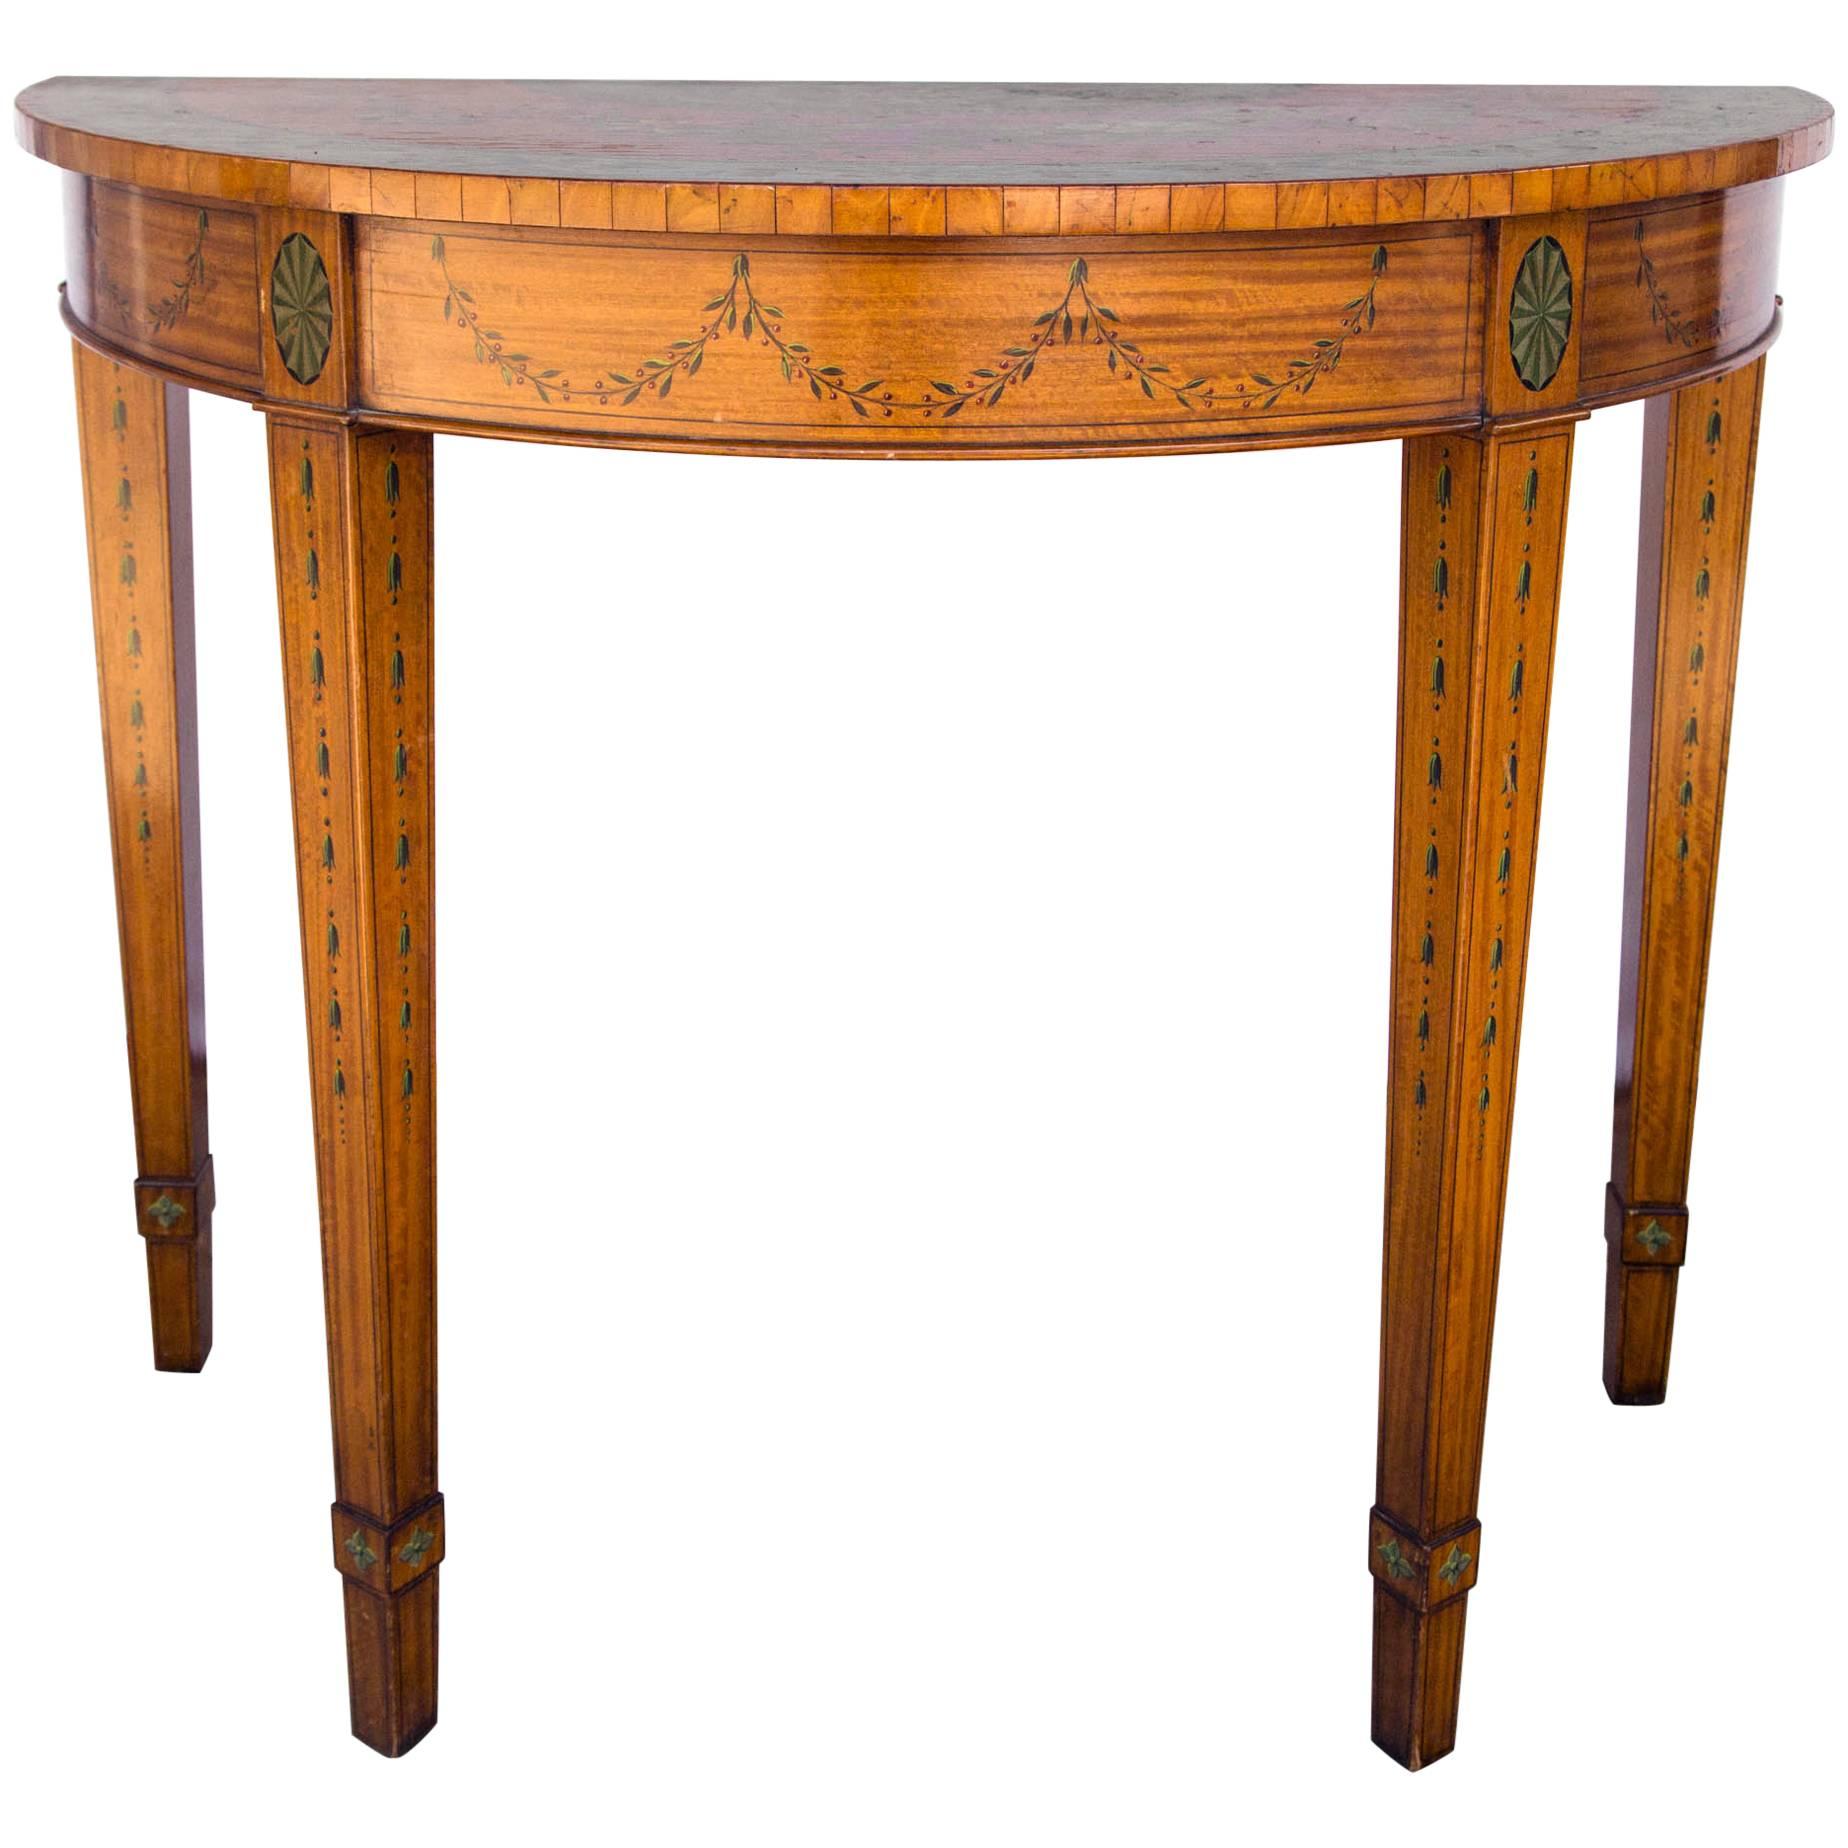 Hand-Painted Light Mahogany Demilune Table For Sale